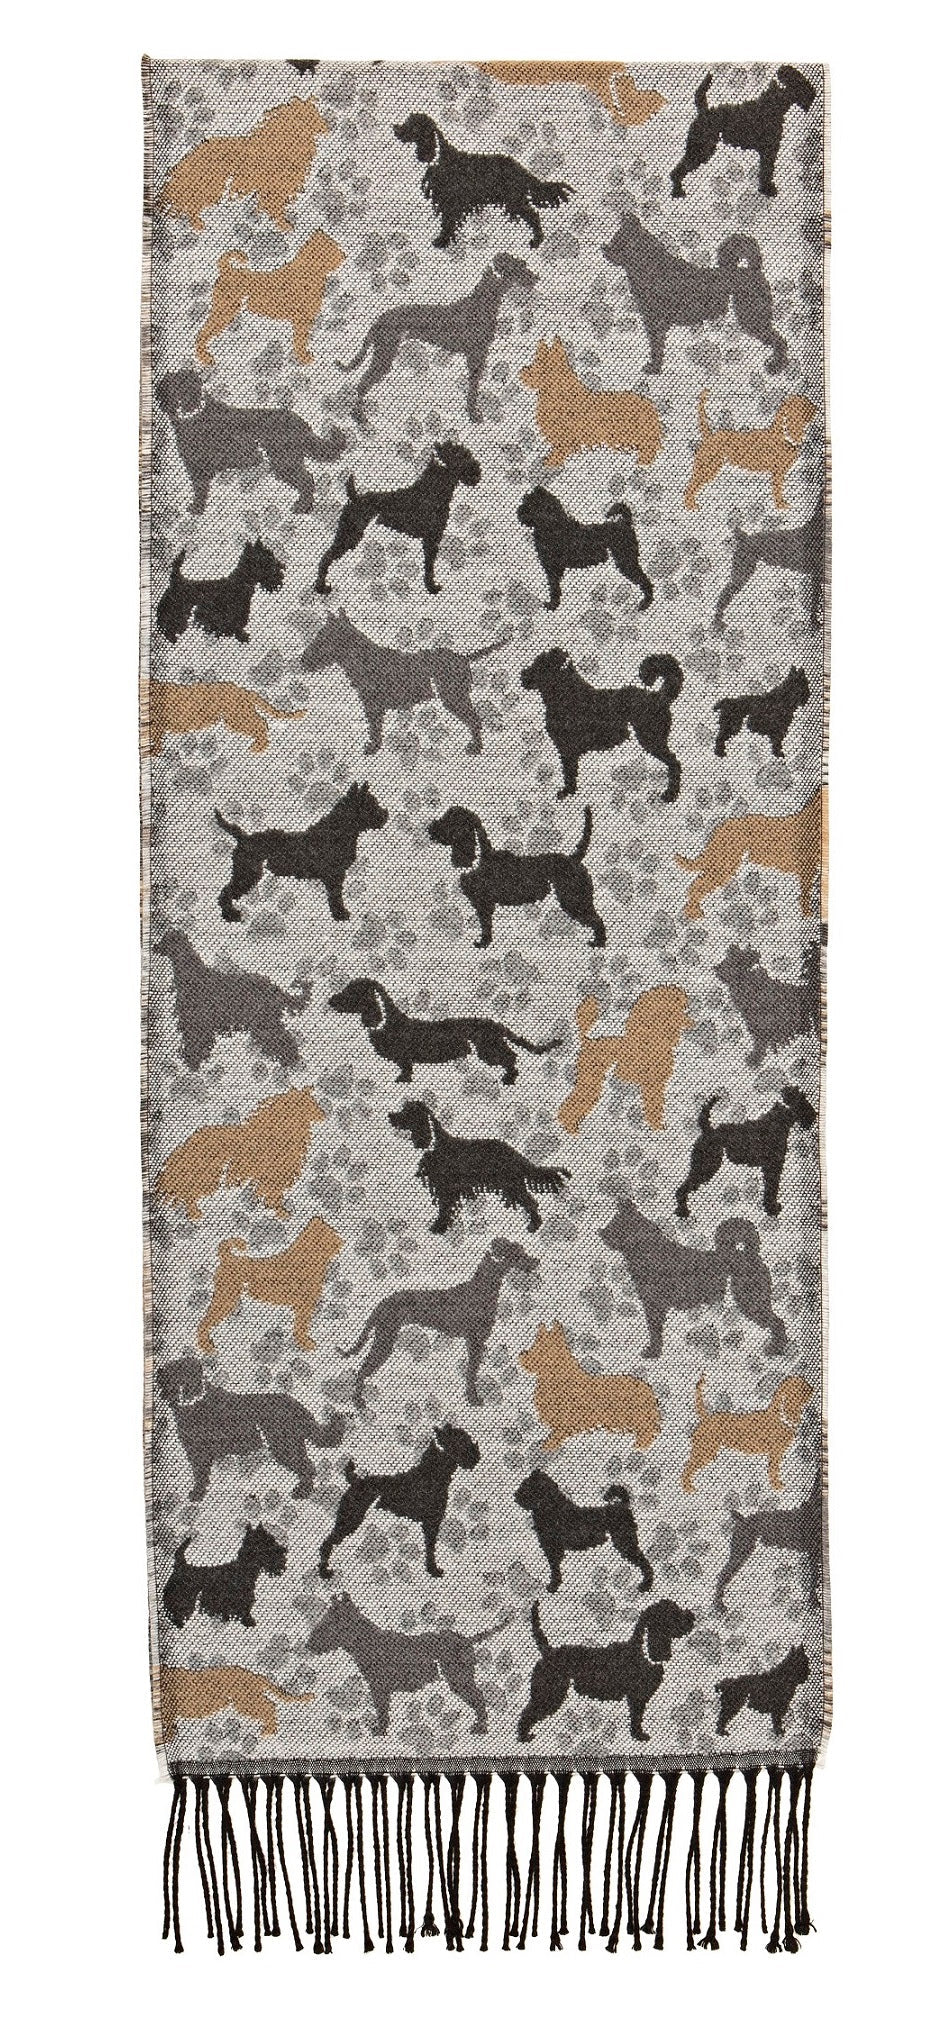 Scarf with Dogs Motif